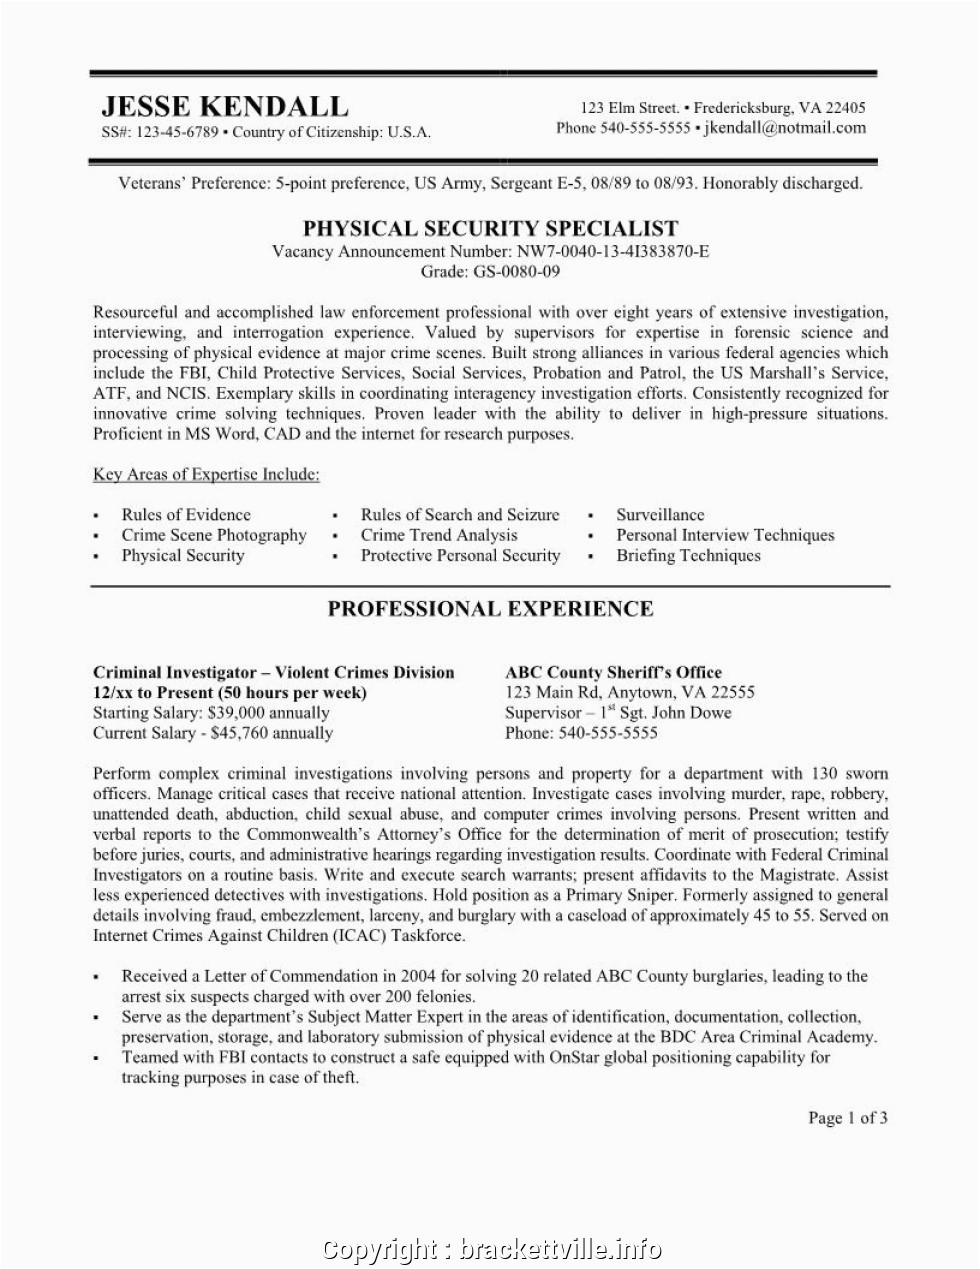 Sample Resume for Administrative assistant with No Experience top Administrative Ficer Resume format Sample Medical